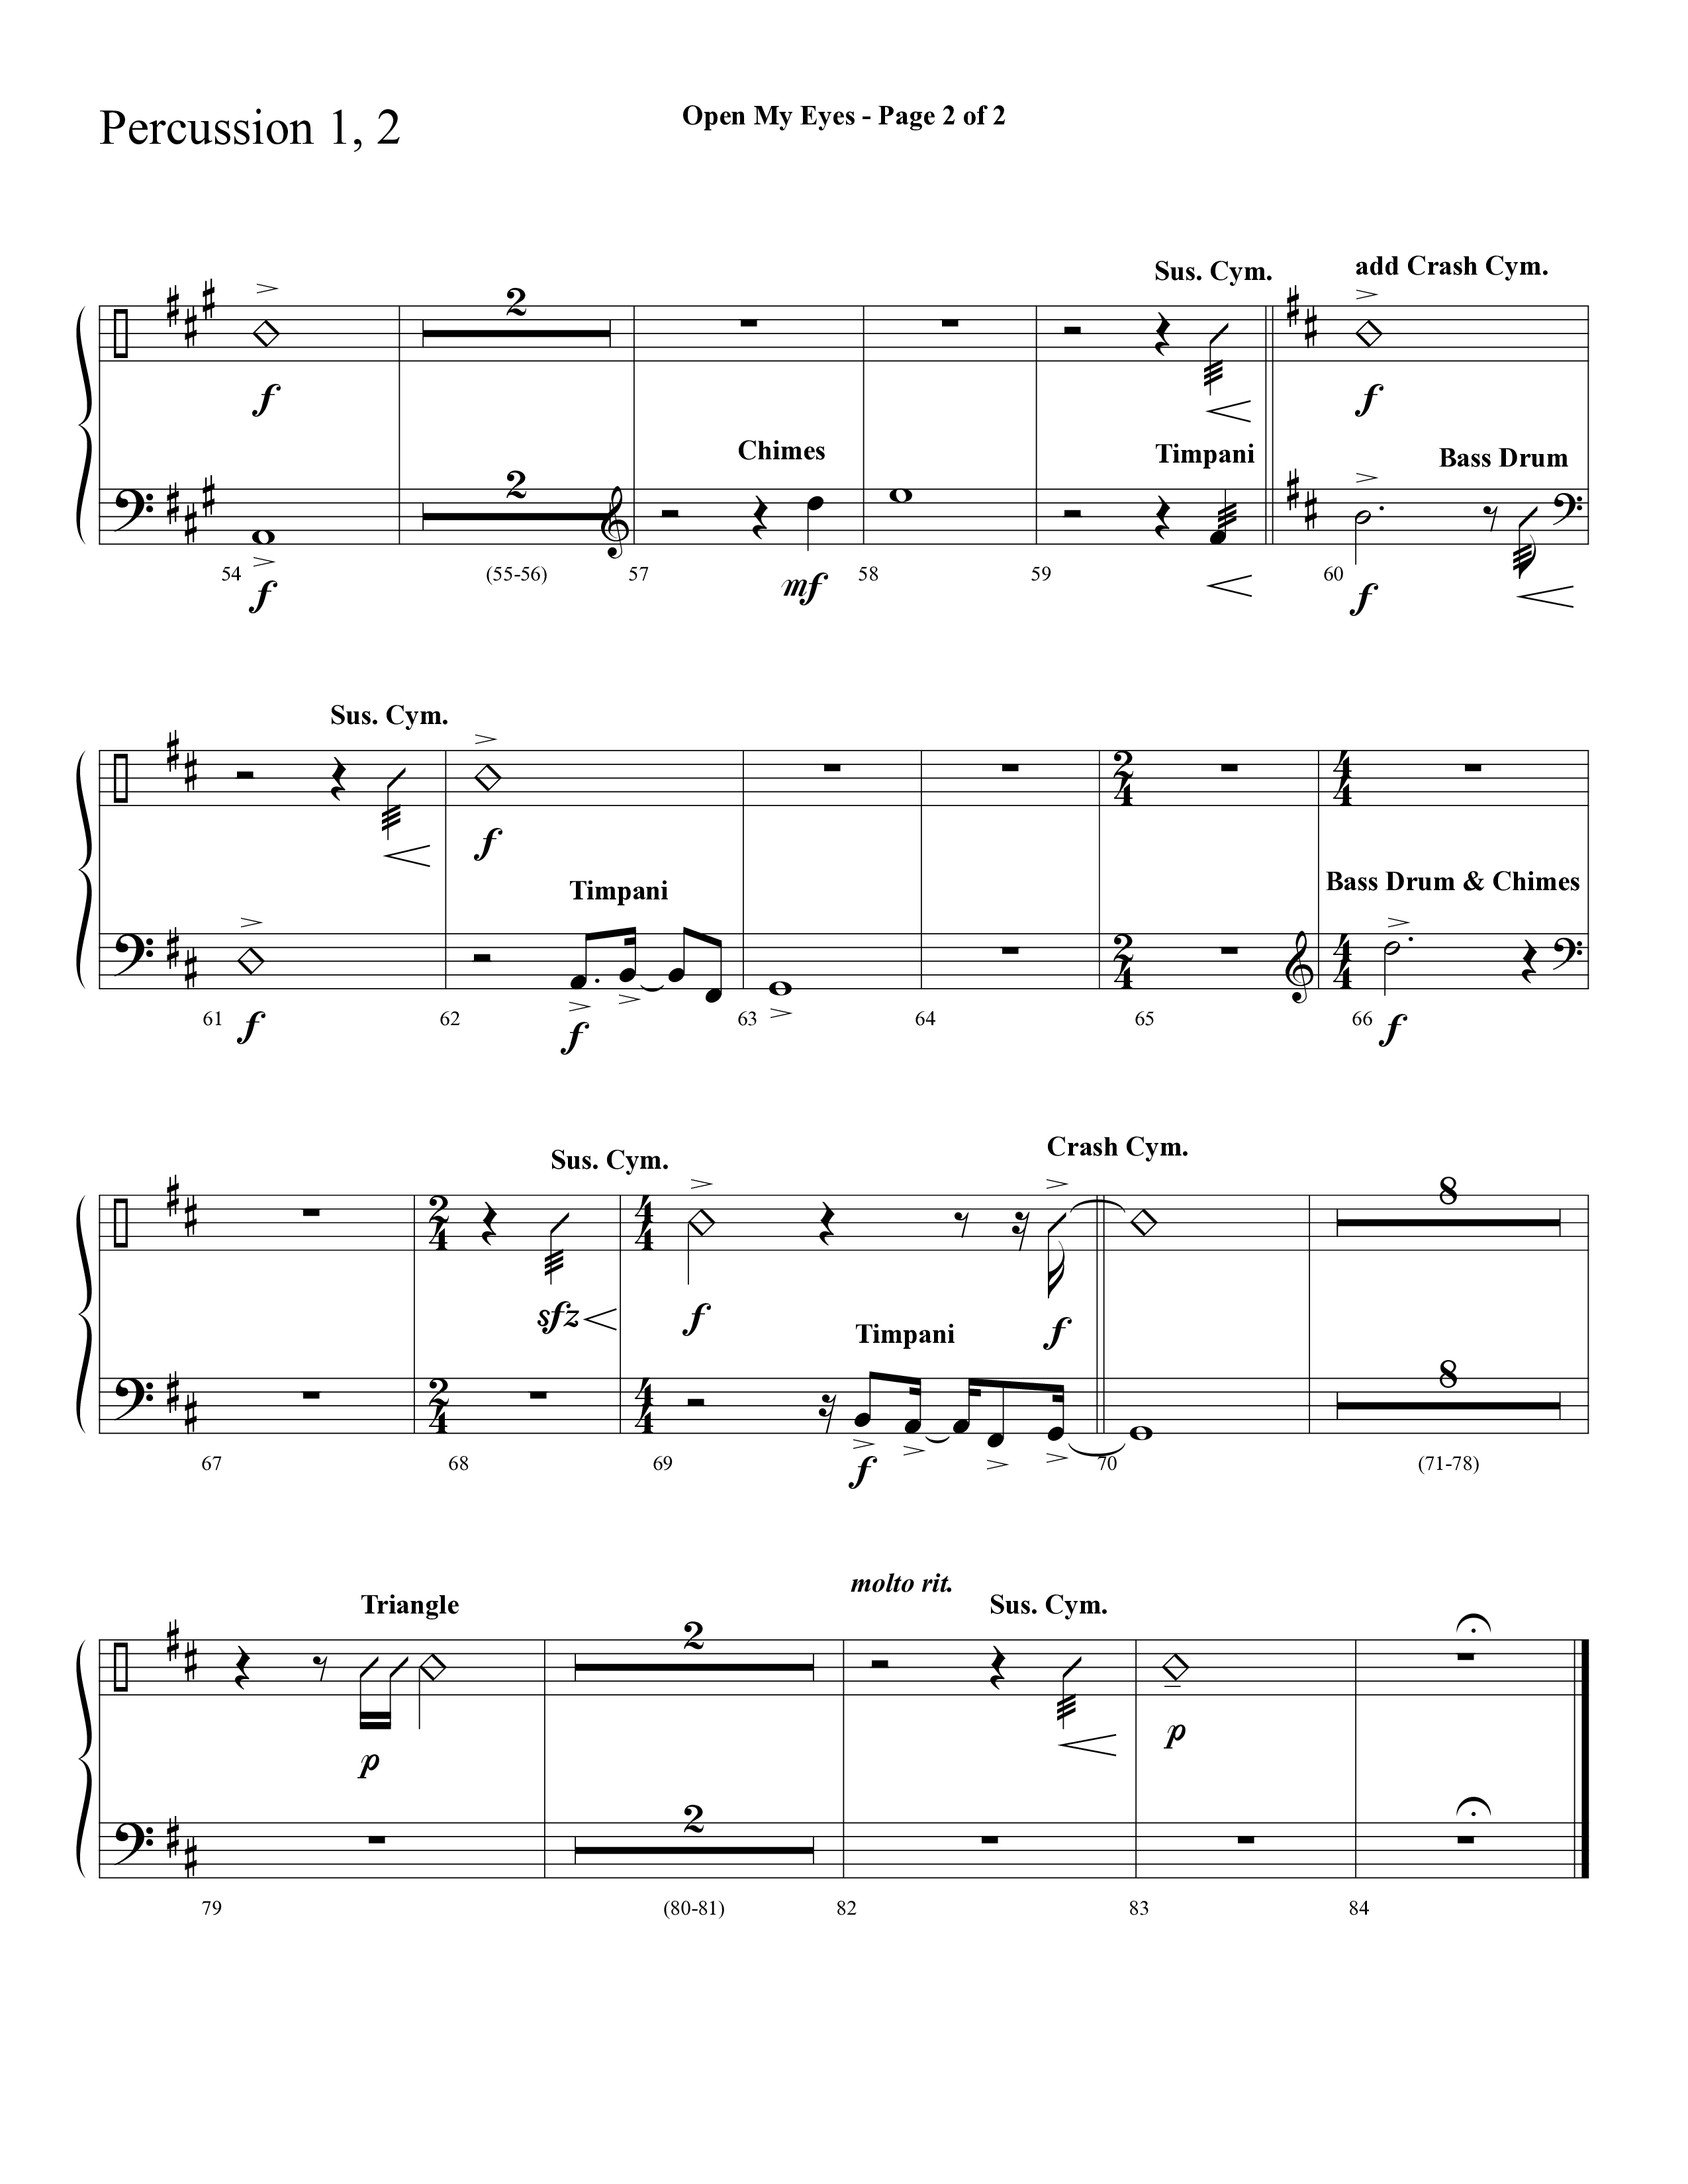 Open My Eyes (with Be Thou My Vision) (Choral Anthem SATB) Percussion 1/2 (Arr. Cliff Duren / Lifeway Choral)